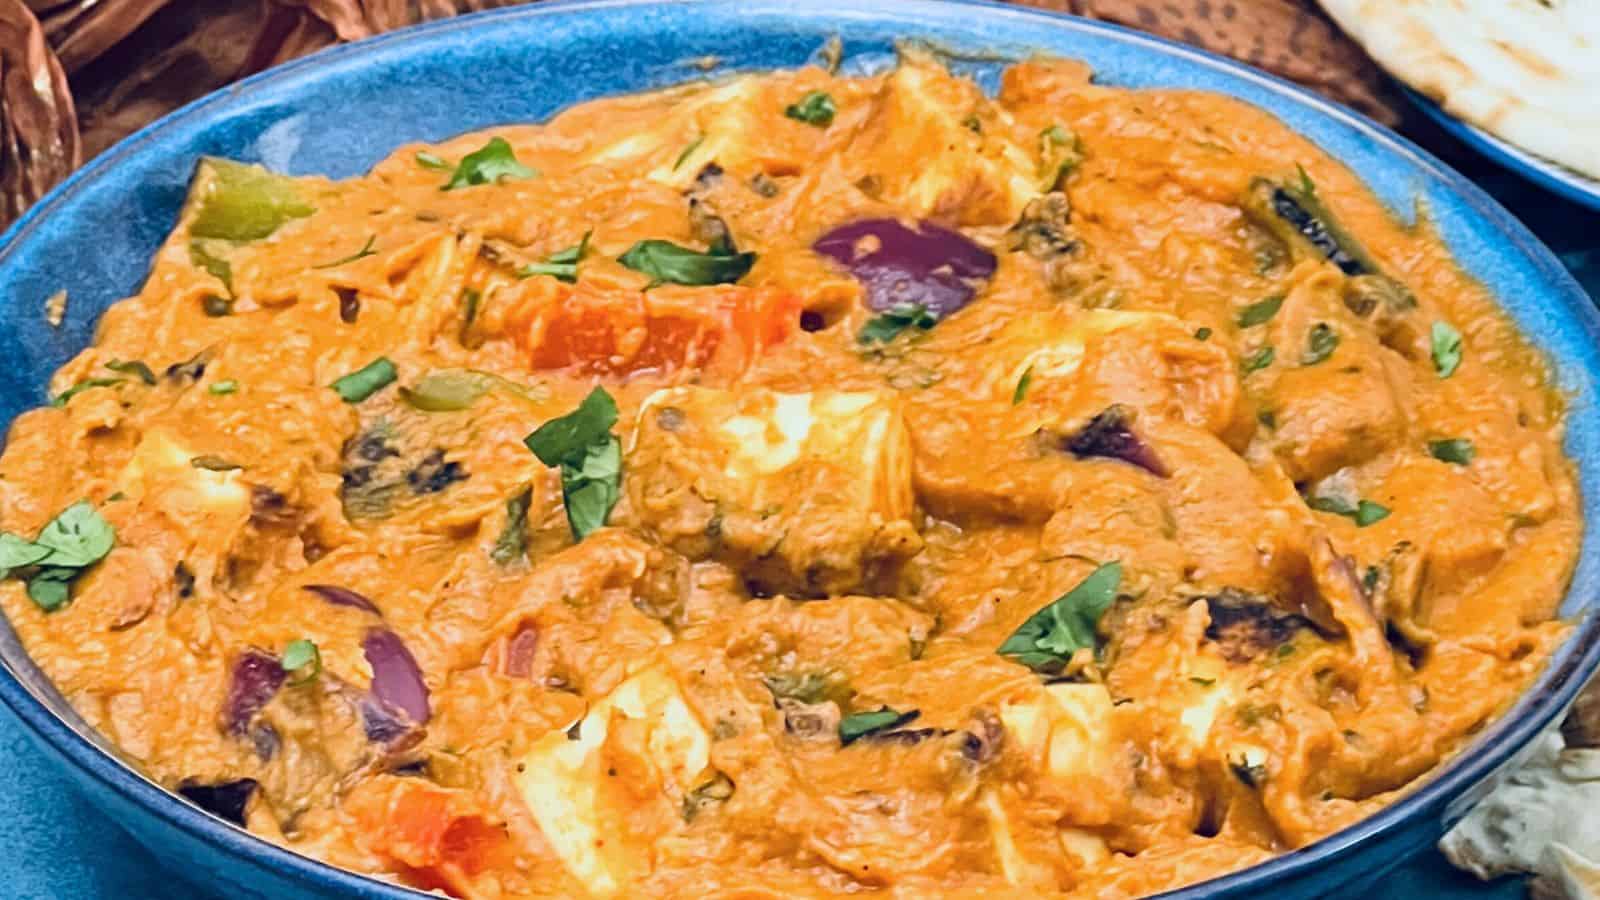 A vibrant dish of Paneer tikka masala garnished with cilantro in a blue bowl, served alongside naan bread.